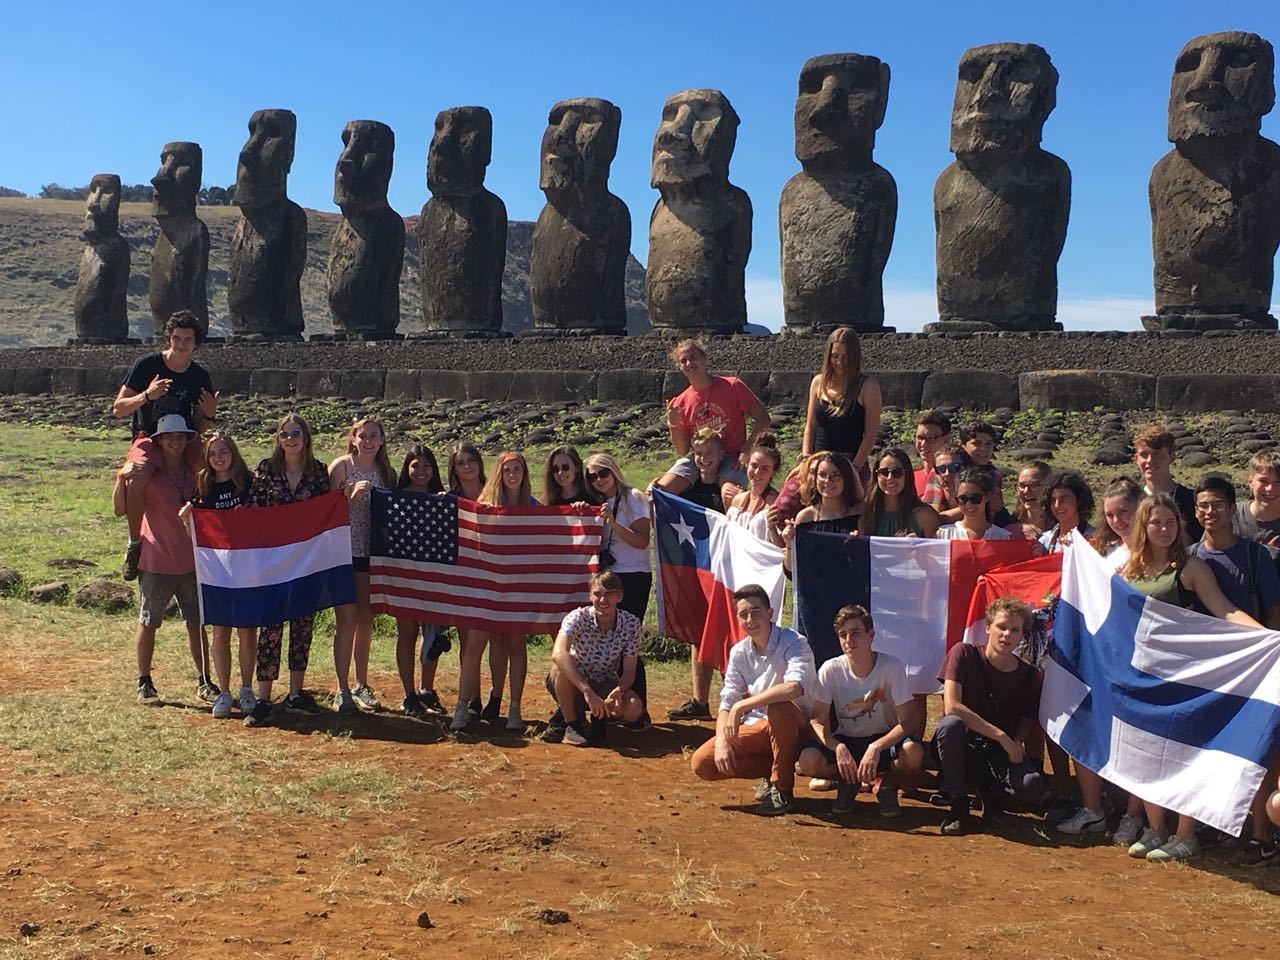 Easter Island was one of the stops for the exchange students.